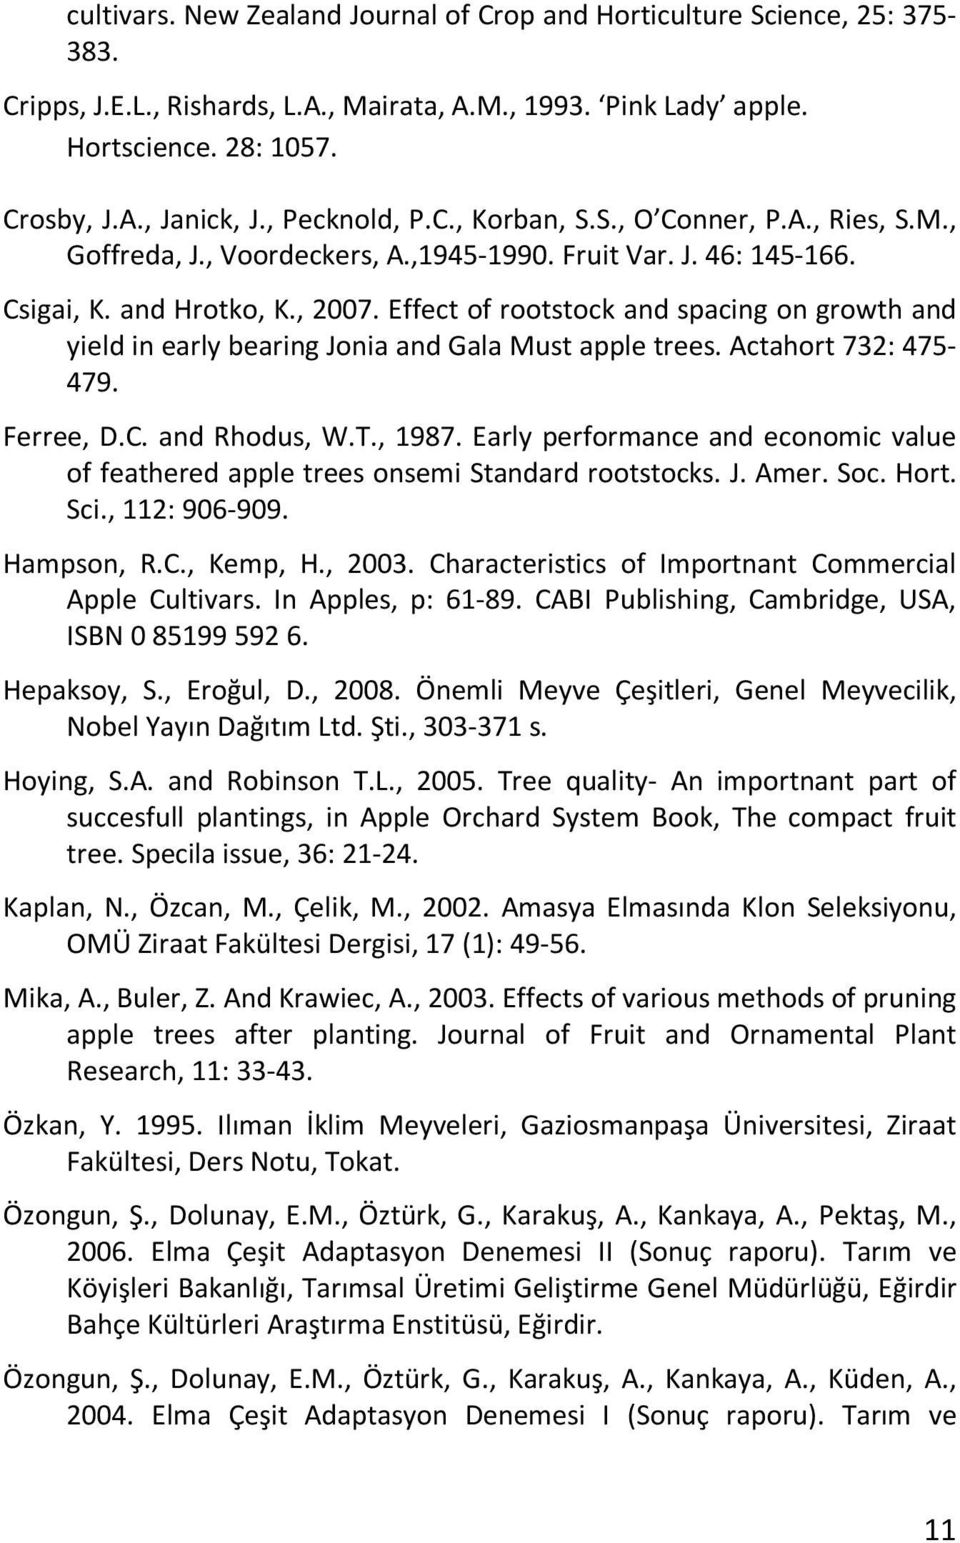 Effect of rootstock and spacing on growth and yield in early bearing Jonia and Gala Must apple trees. Actahort 732: 475-479. Ferree, D.C. and Rhodus, W.T., 1987.